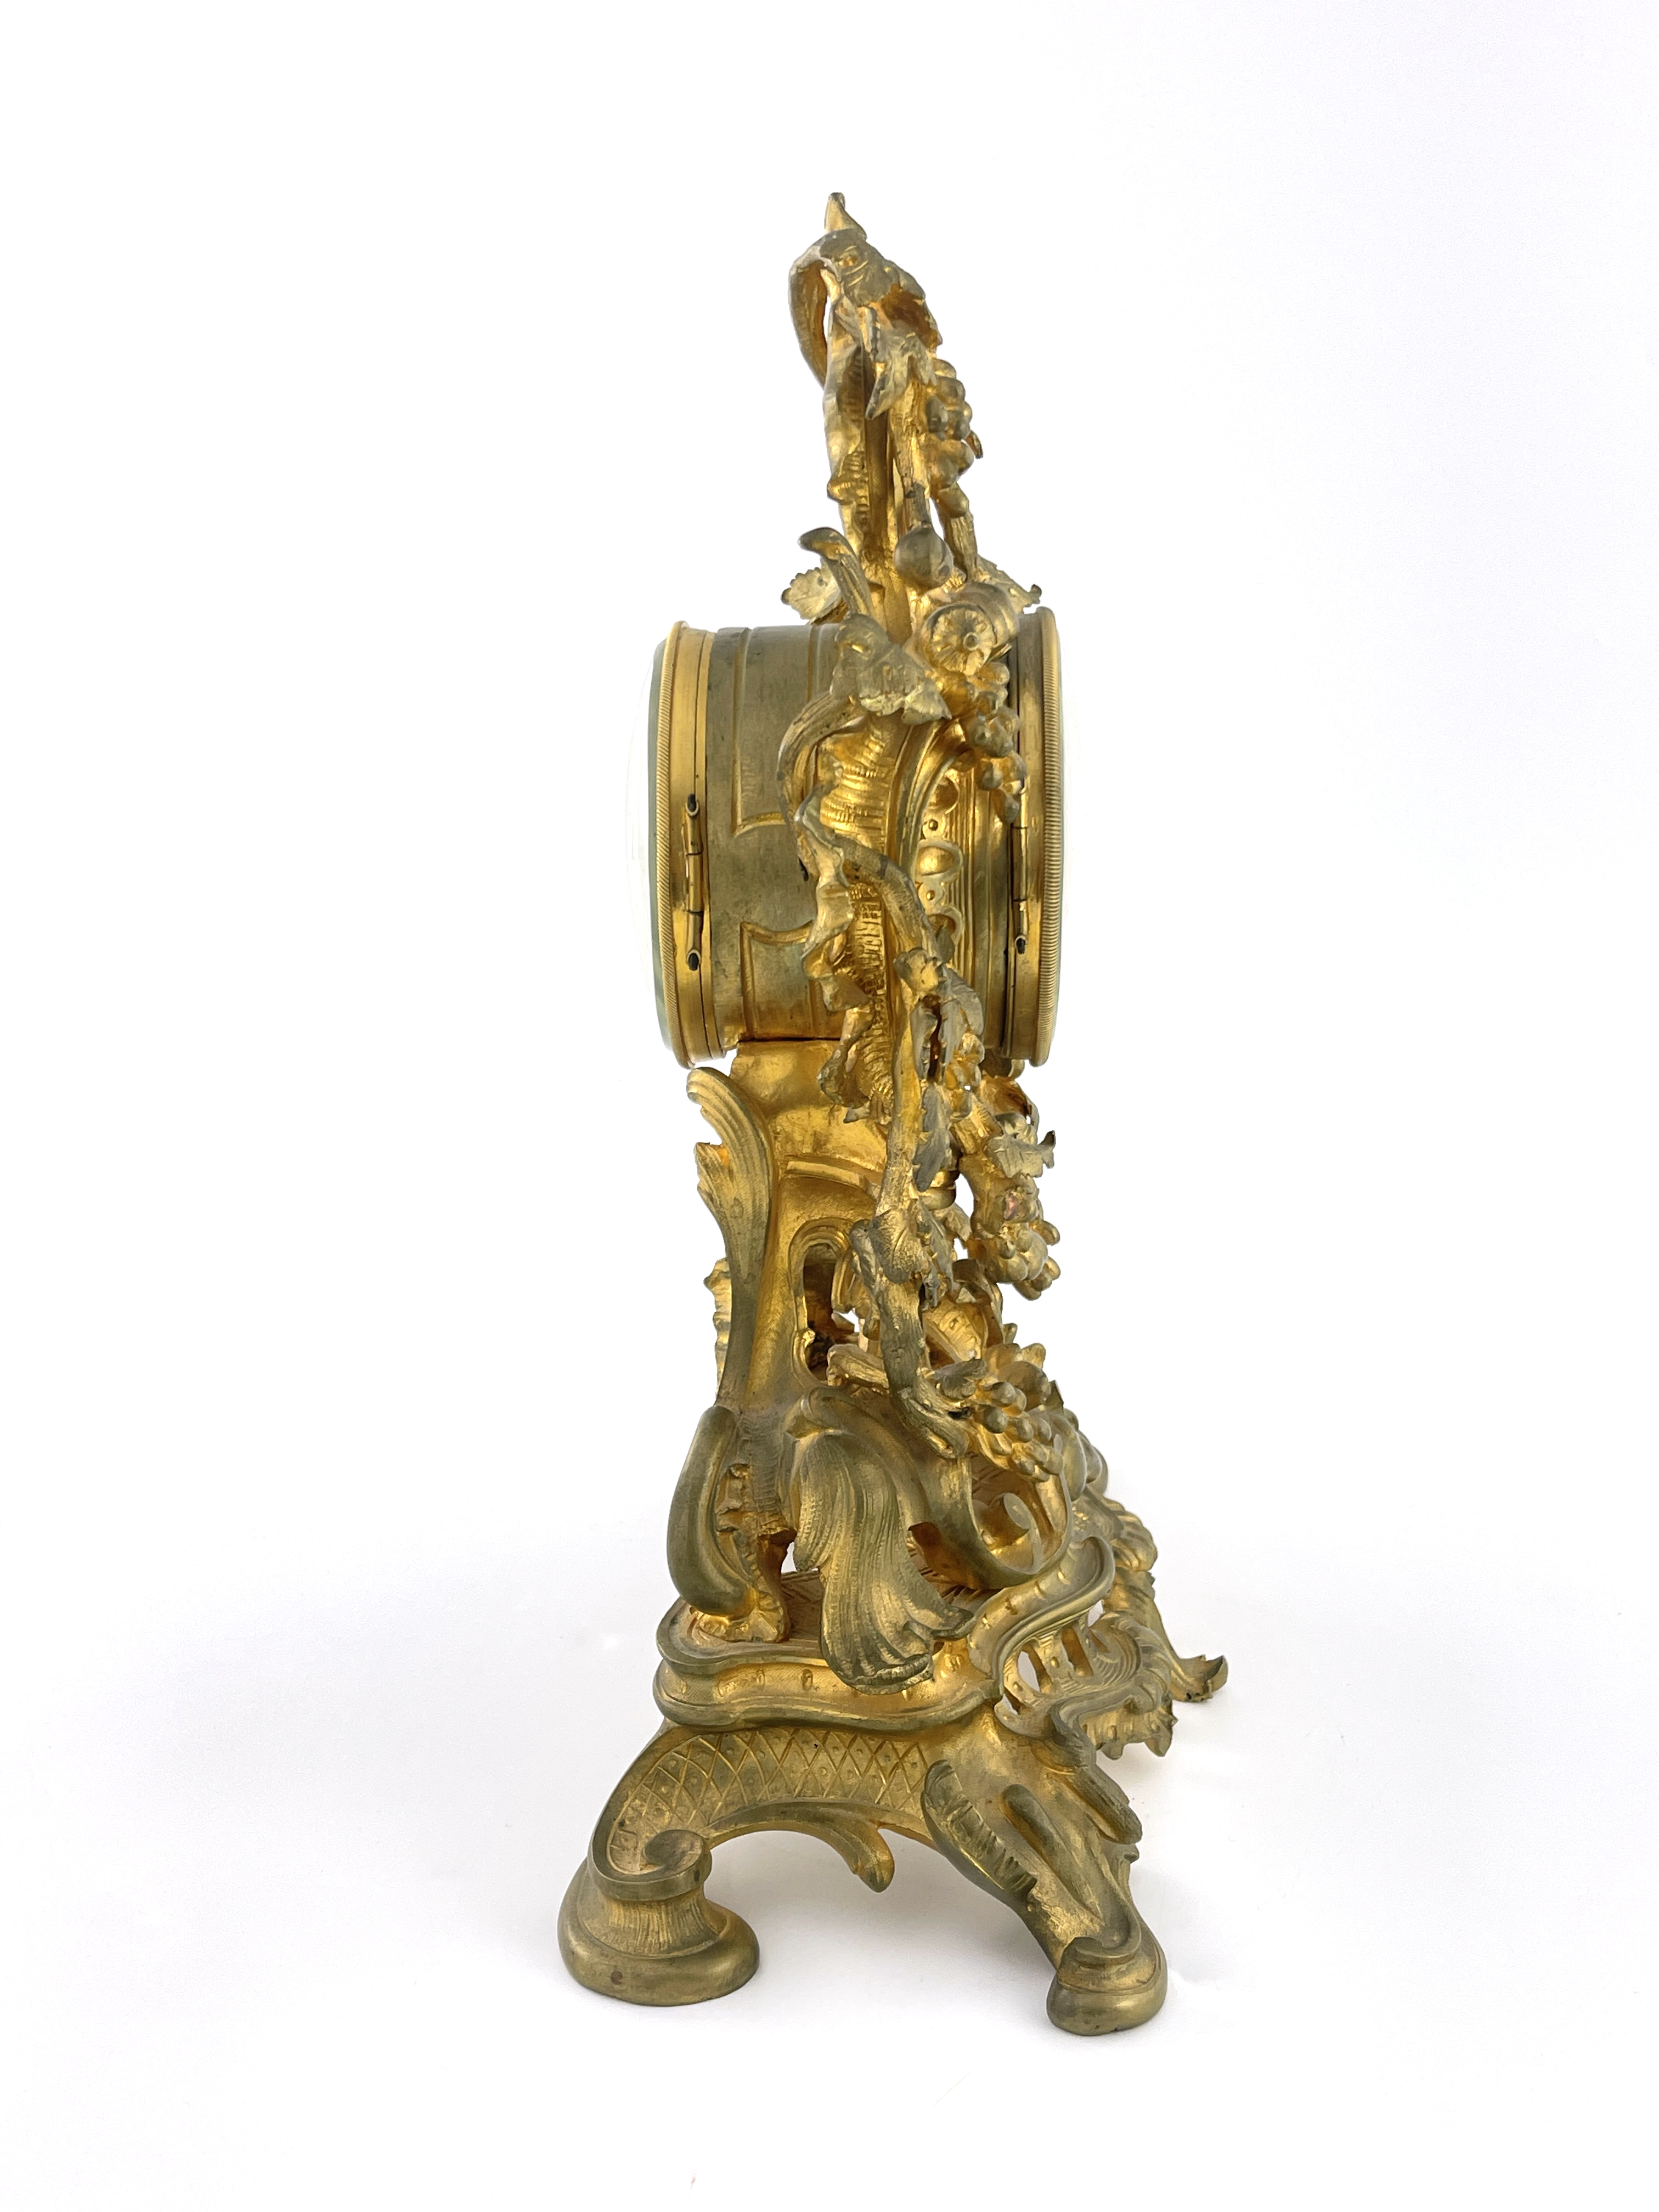 Raingo Freres, a mid 19th century French ormolu and gilt brass mantel clock, relief moulded Rococo - Image 4 of 4